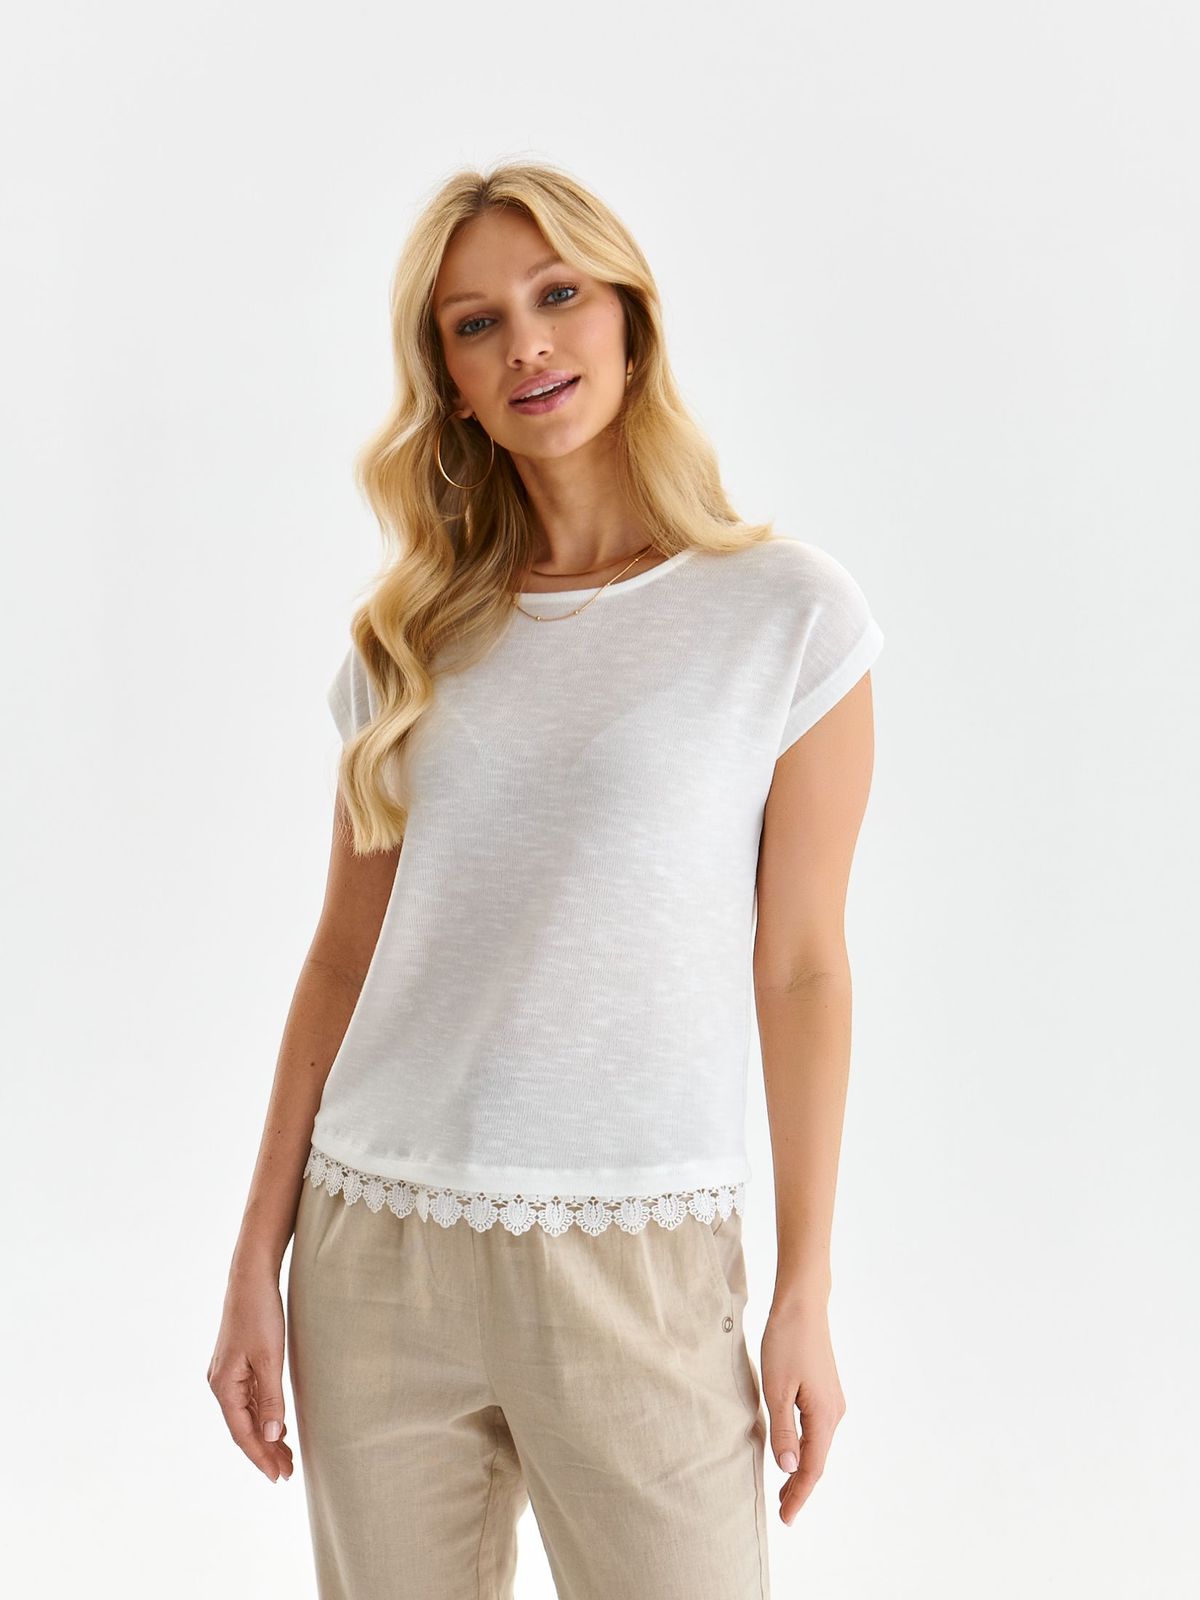 White t-shirt cotton loose fit with lace details